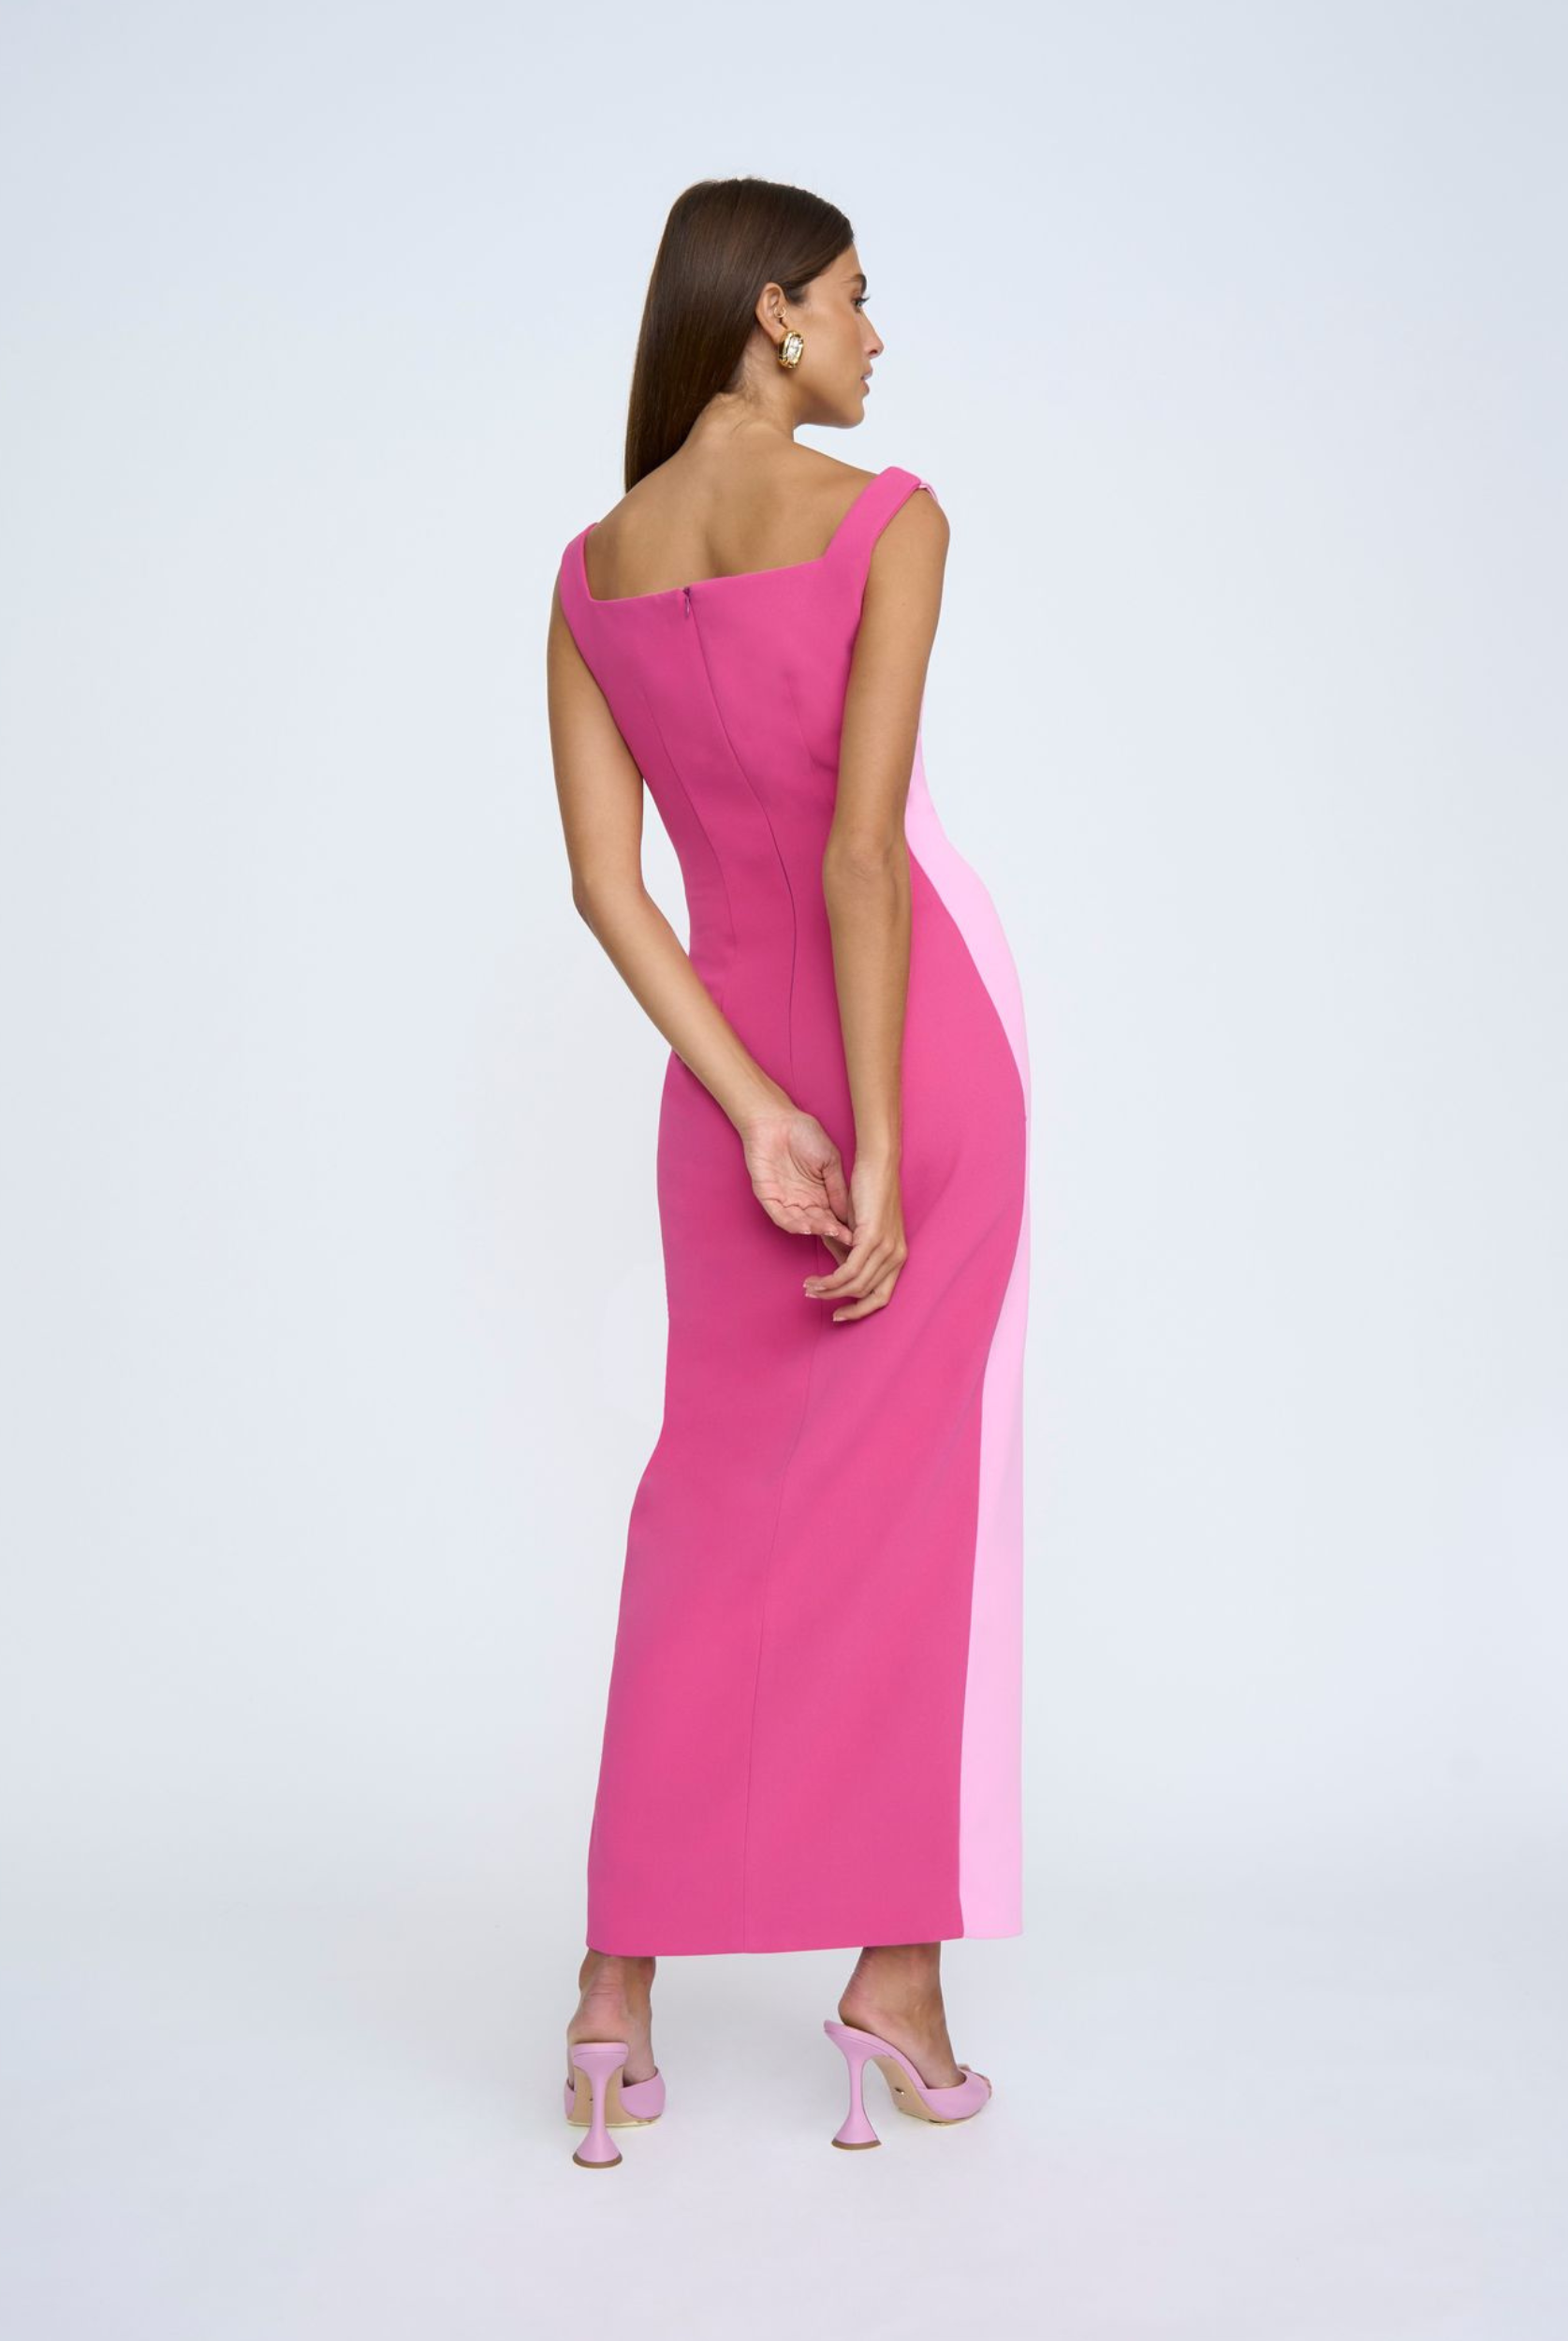 Model wearing the Caterina Two tone pink and dark pinkMidi Dress from Australian Designer Brand By Johnny 